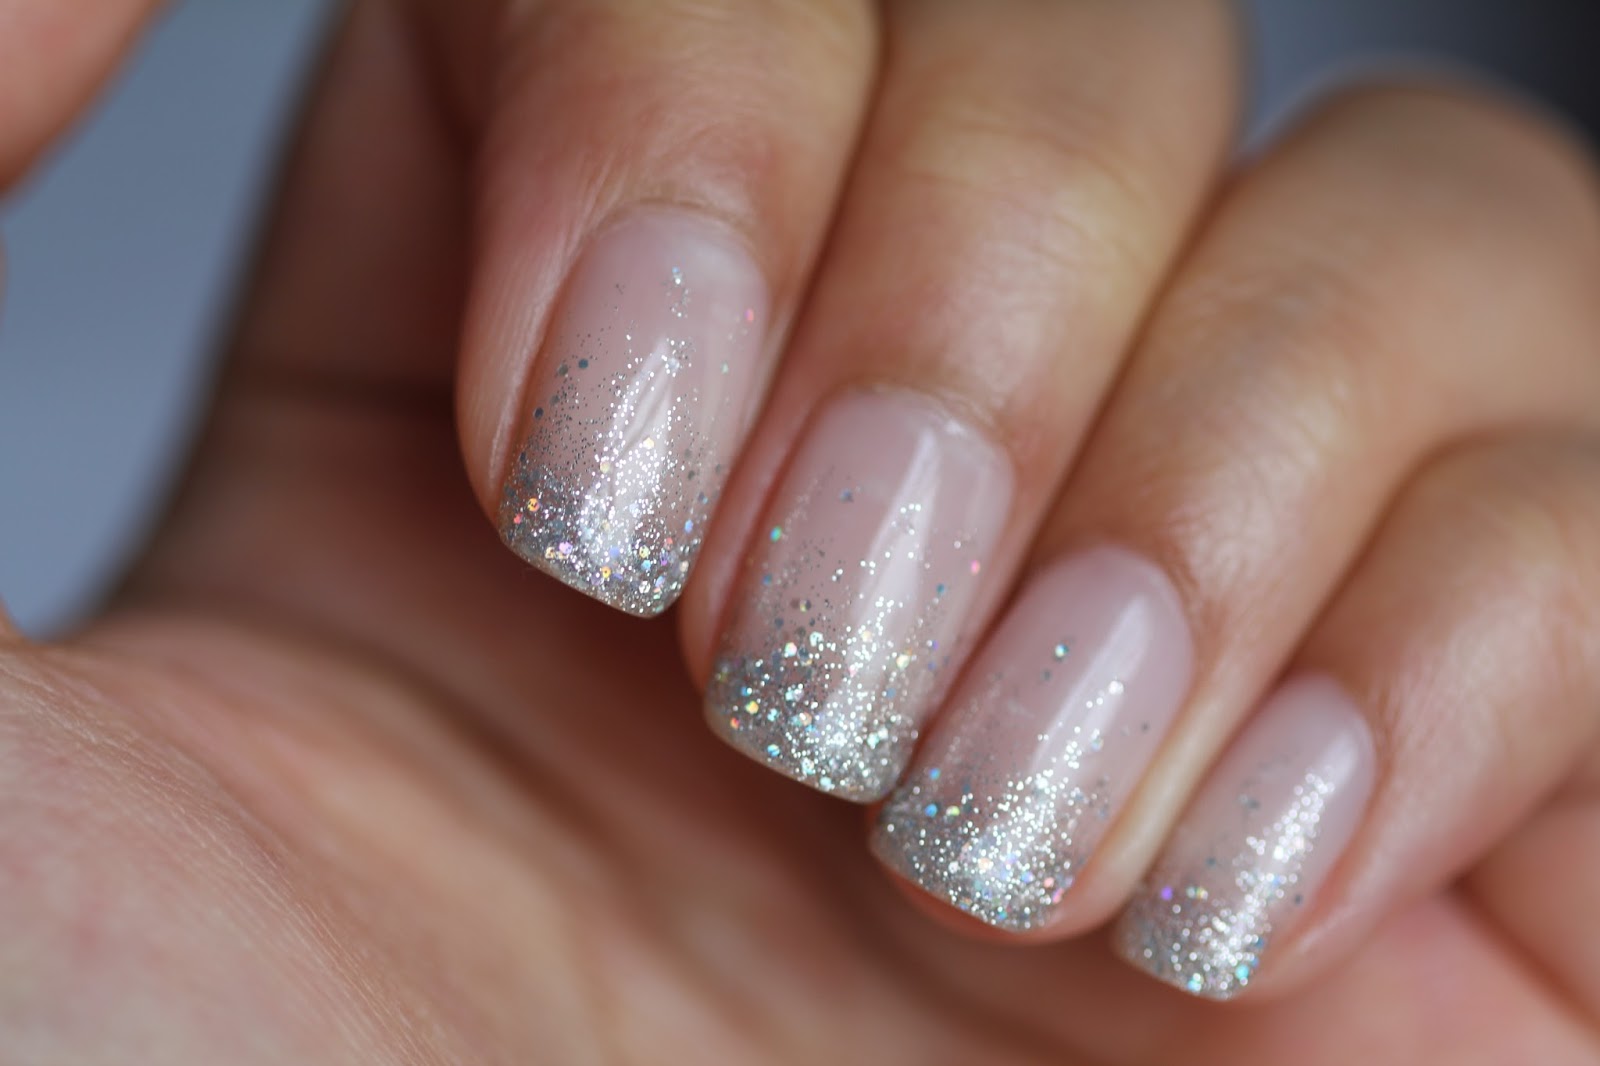 9. French Manicure Toe Nail Art with Glitter - wide 1